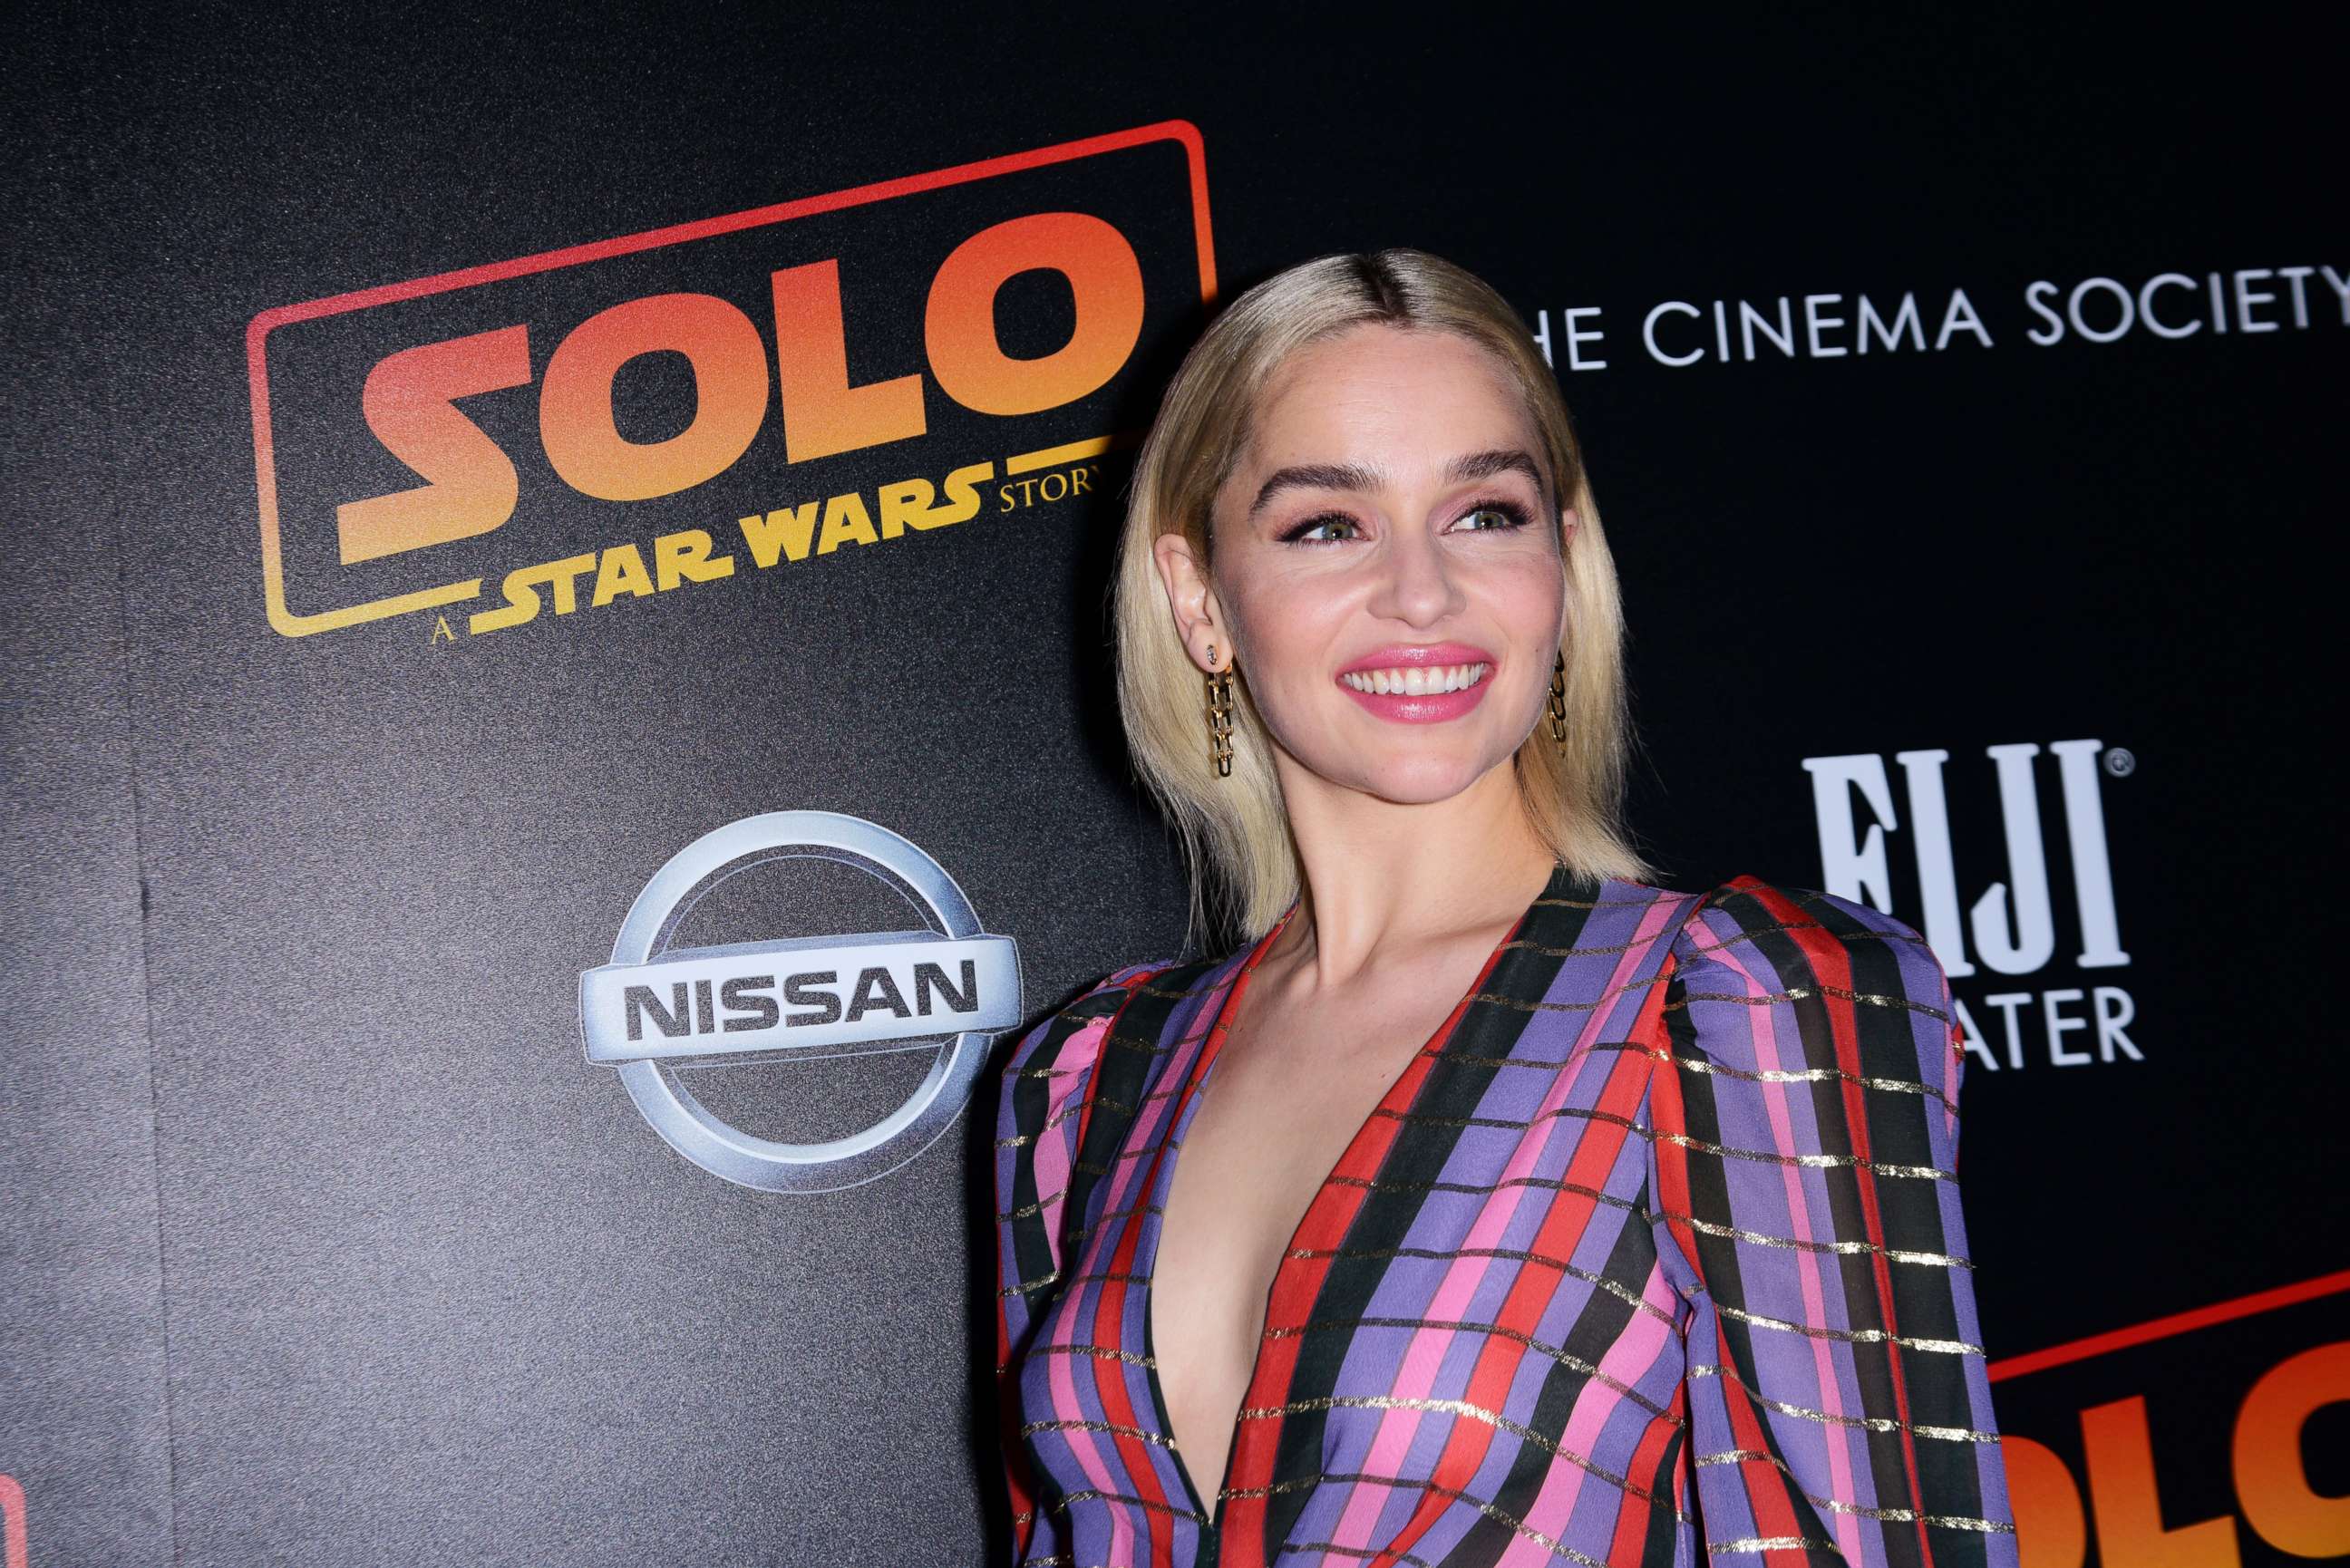 PHOTO: Emilia Clarke at the 'Solo: A Star Wars Story' film premiere, May 21, 2018, in New York City.